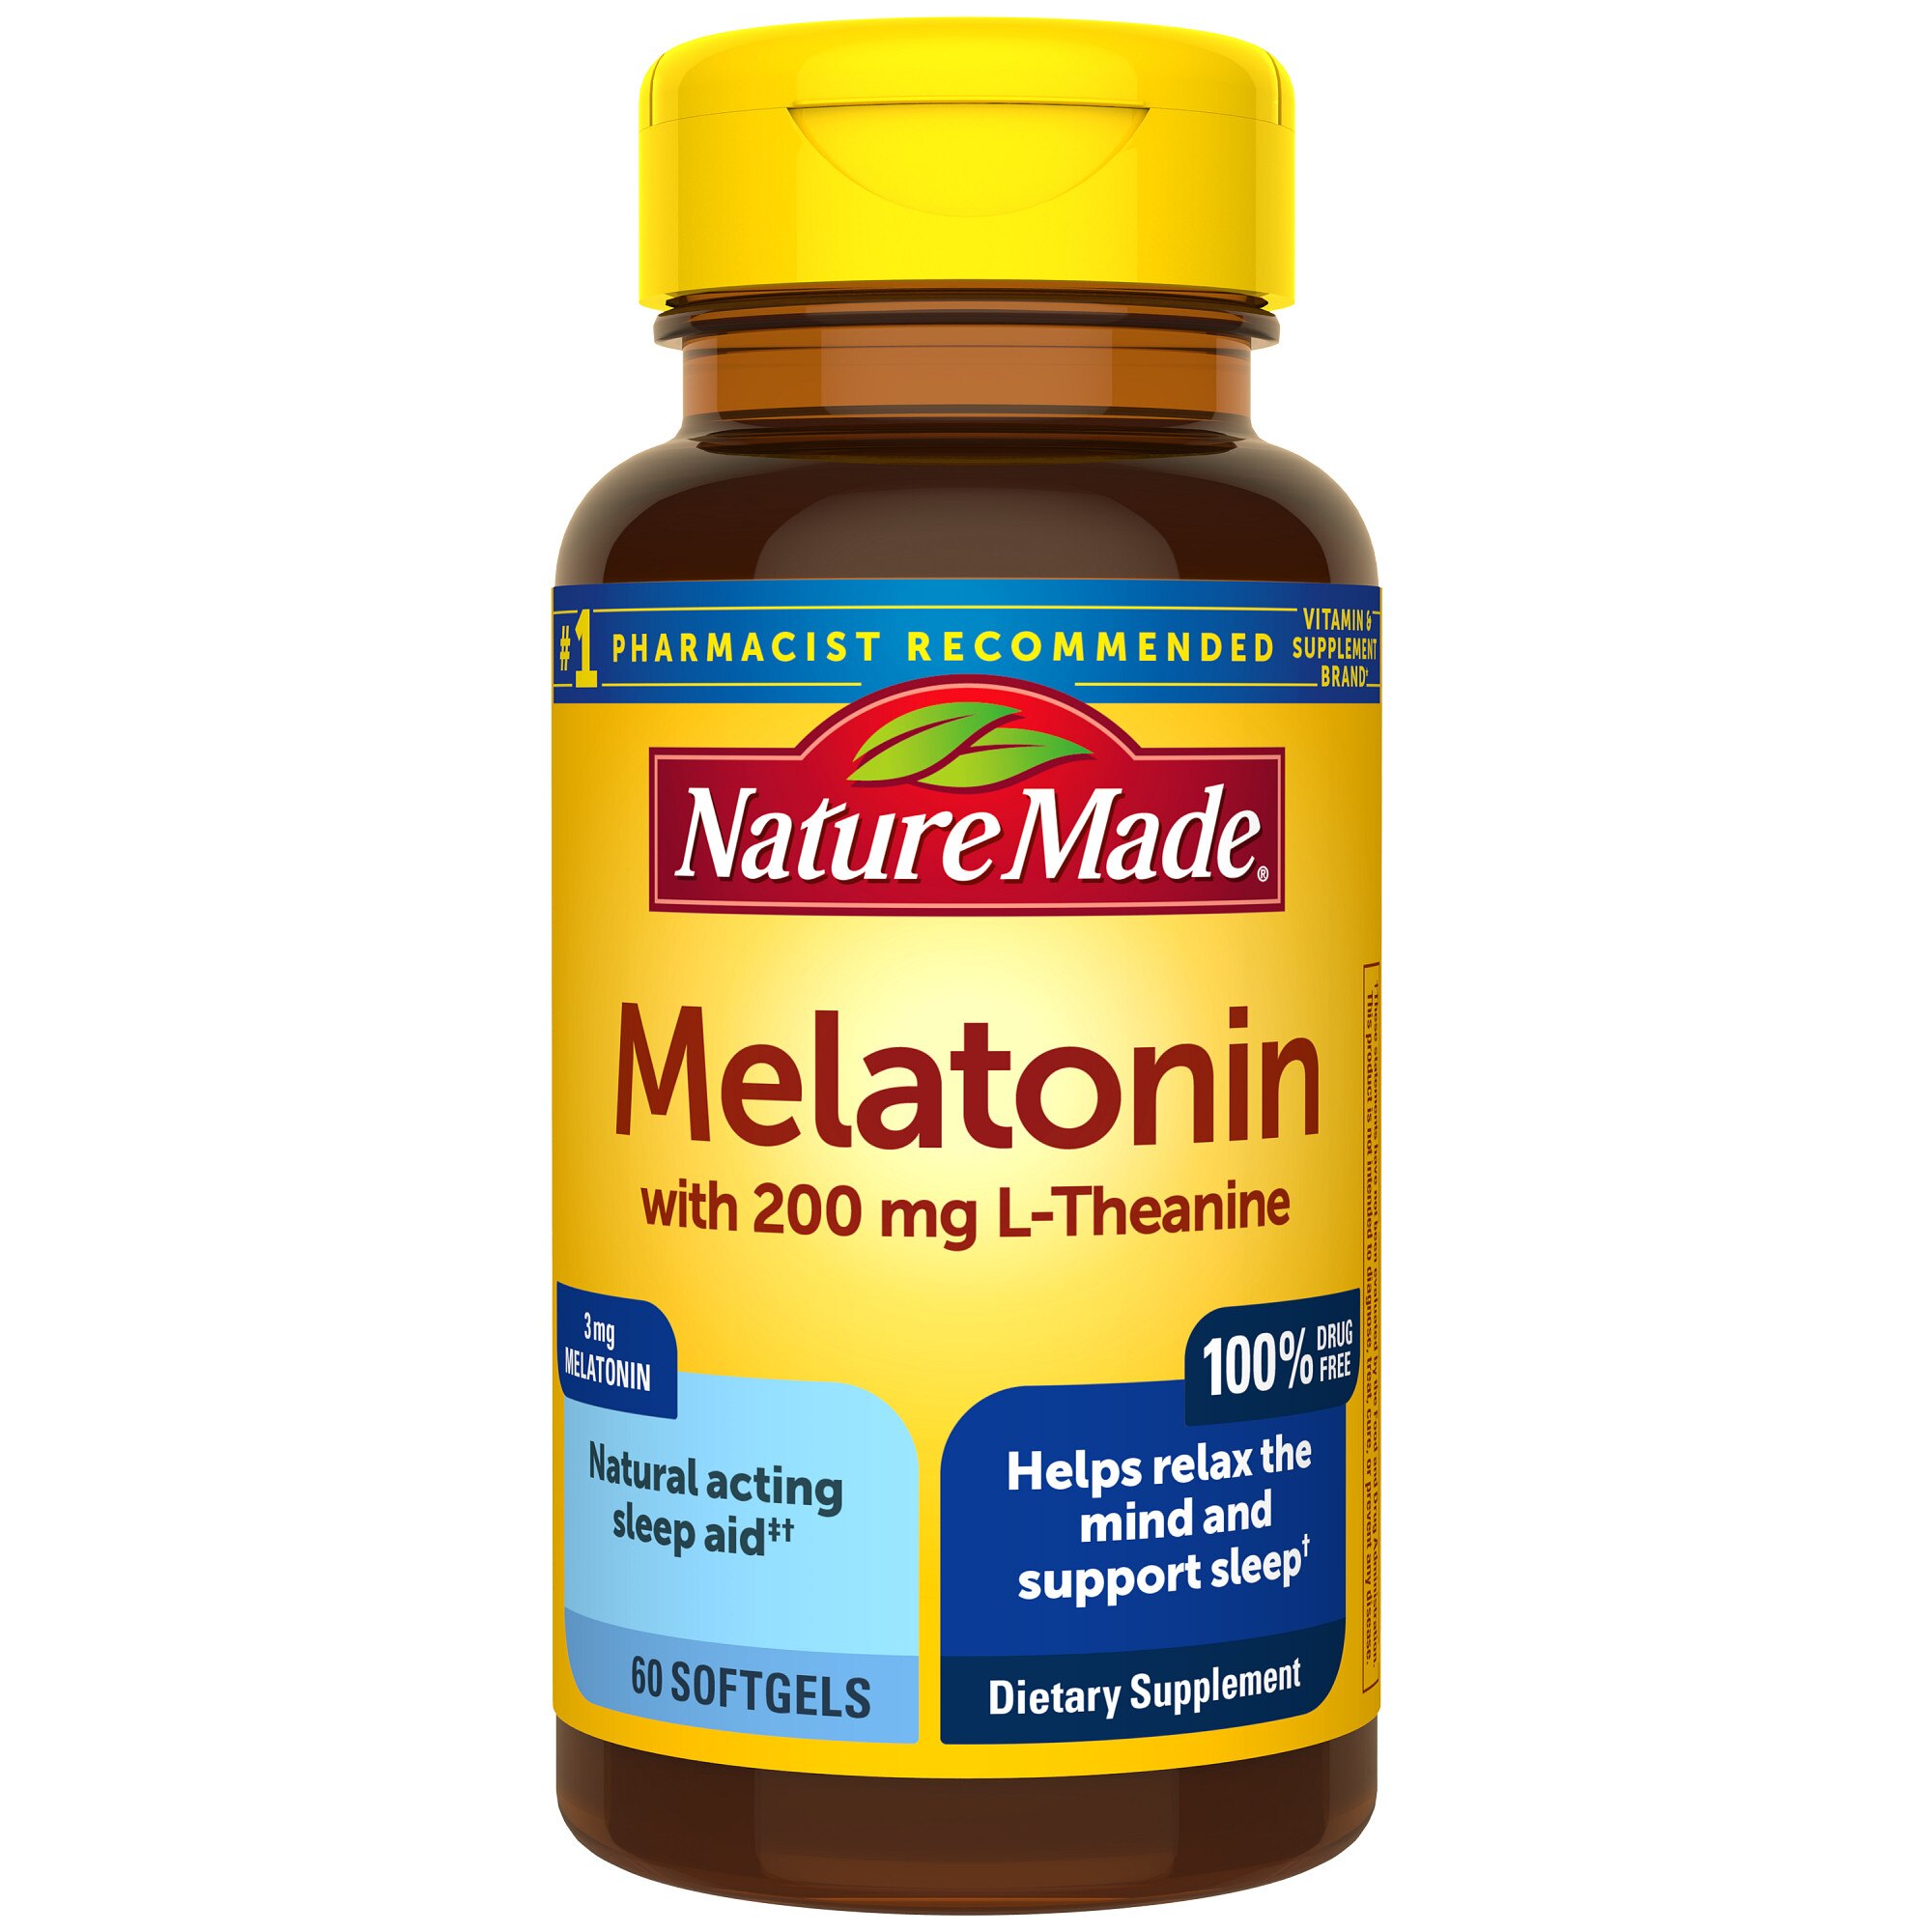 Nature Made Melatonin 3mg with L-Theanine 200mg Softgels, 60 CT